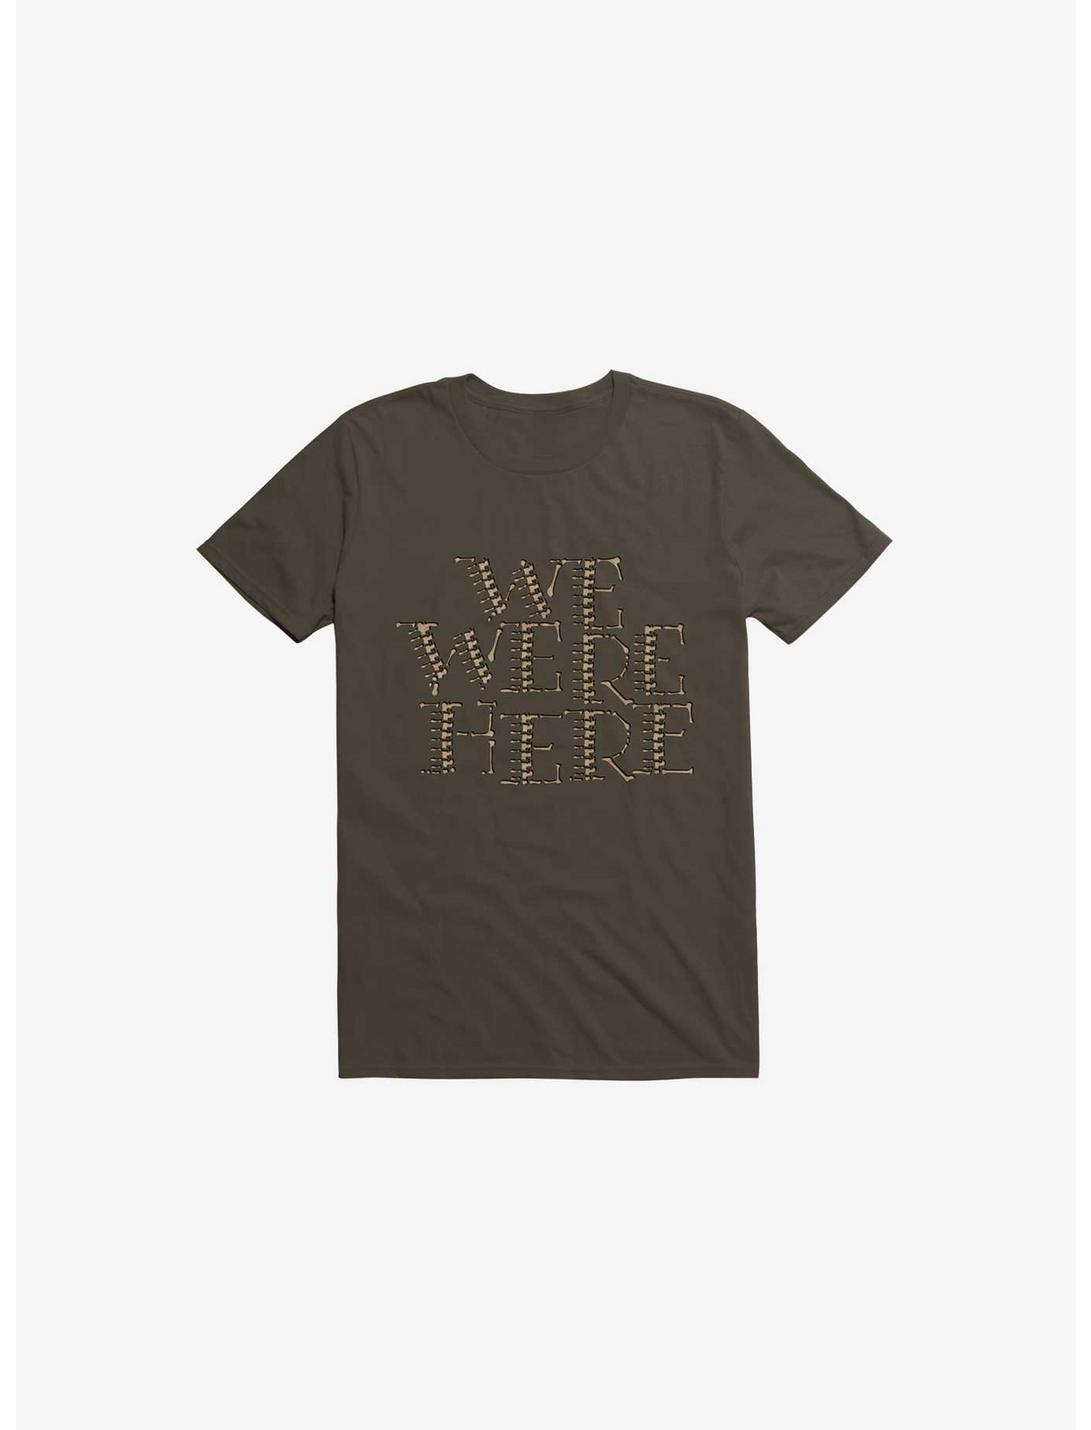 We Were Here T-Shirt, BROWN, hi-res